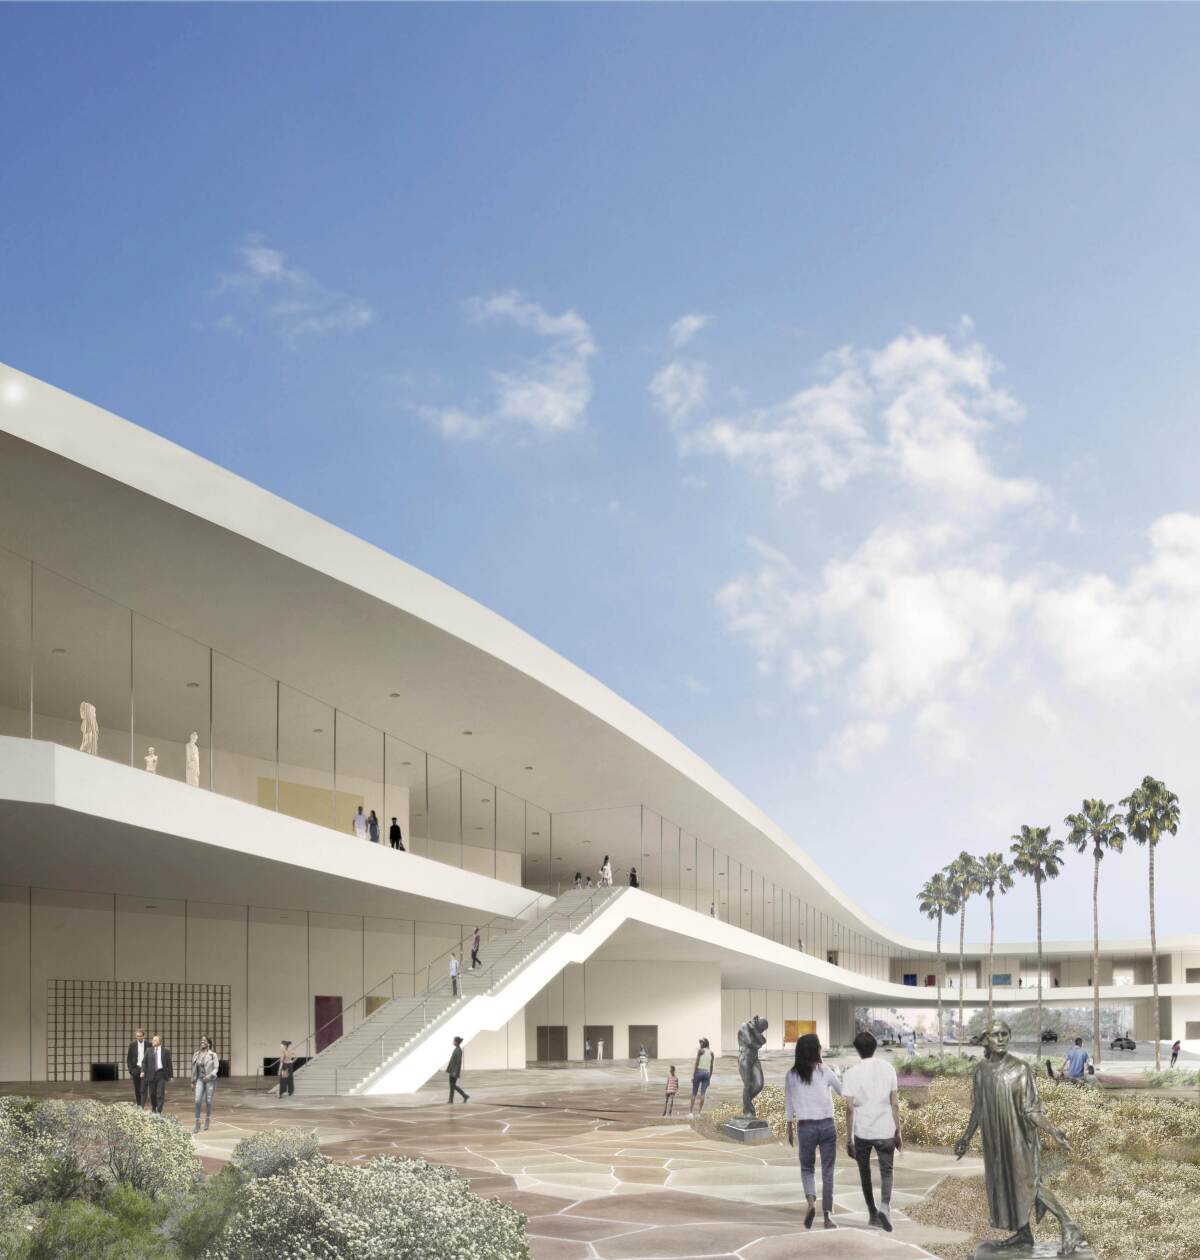 A rendering of the Peter Zumthor design for LACMA's curvy new building.